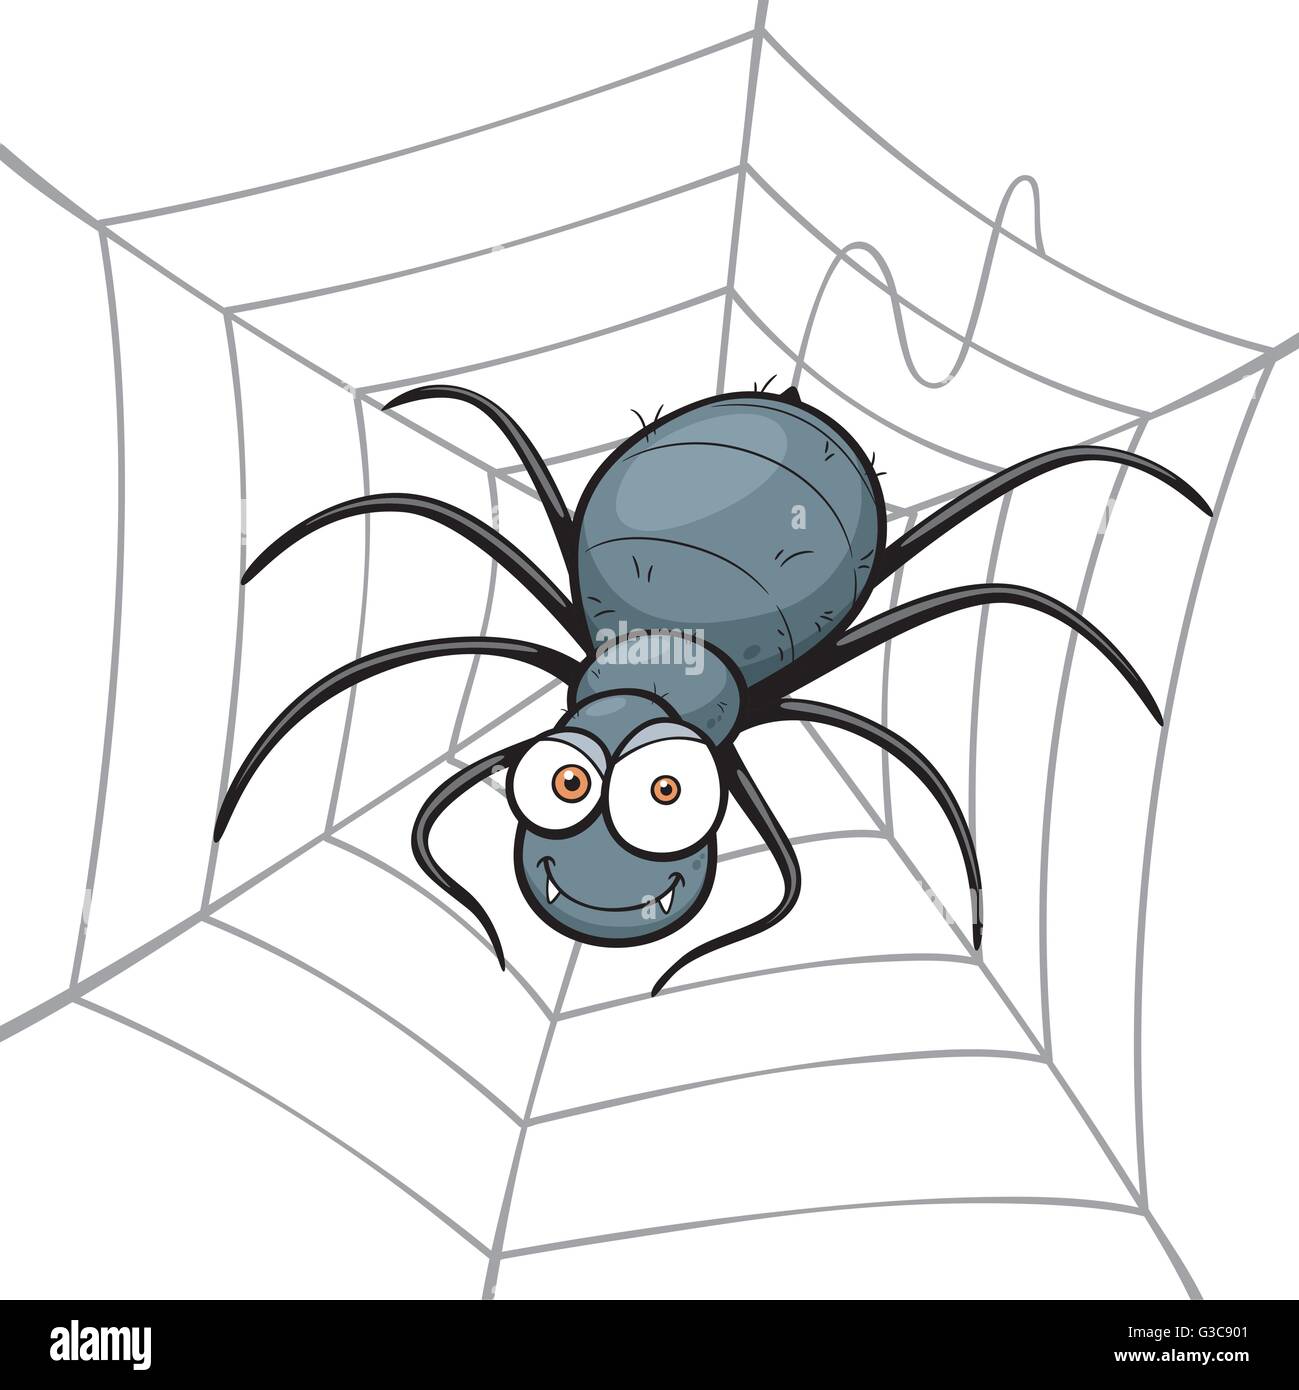 Vector illustration of Spider in a Web Stock Vector